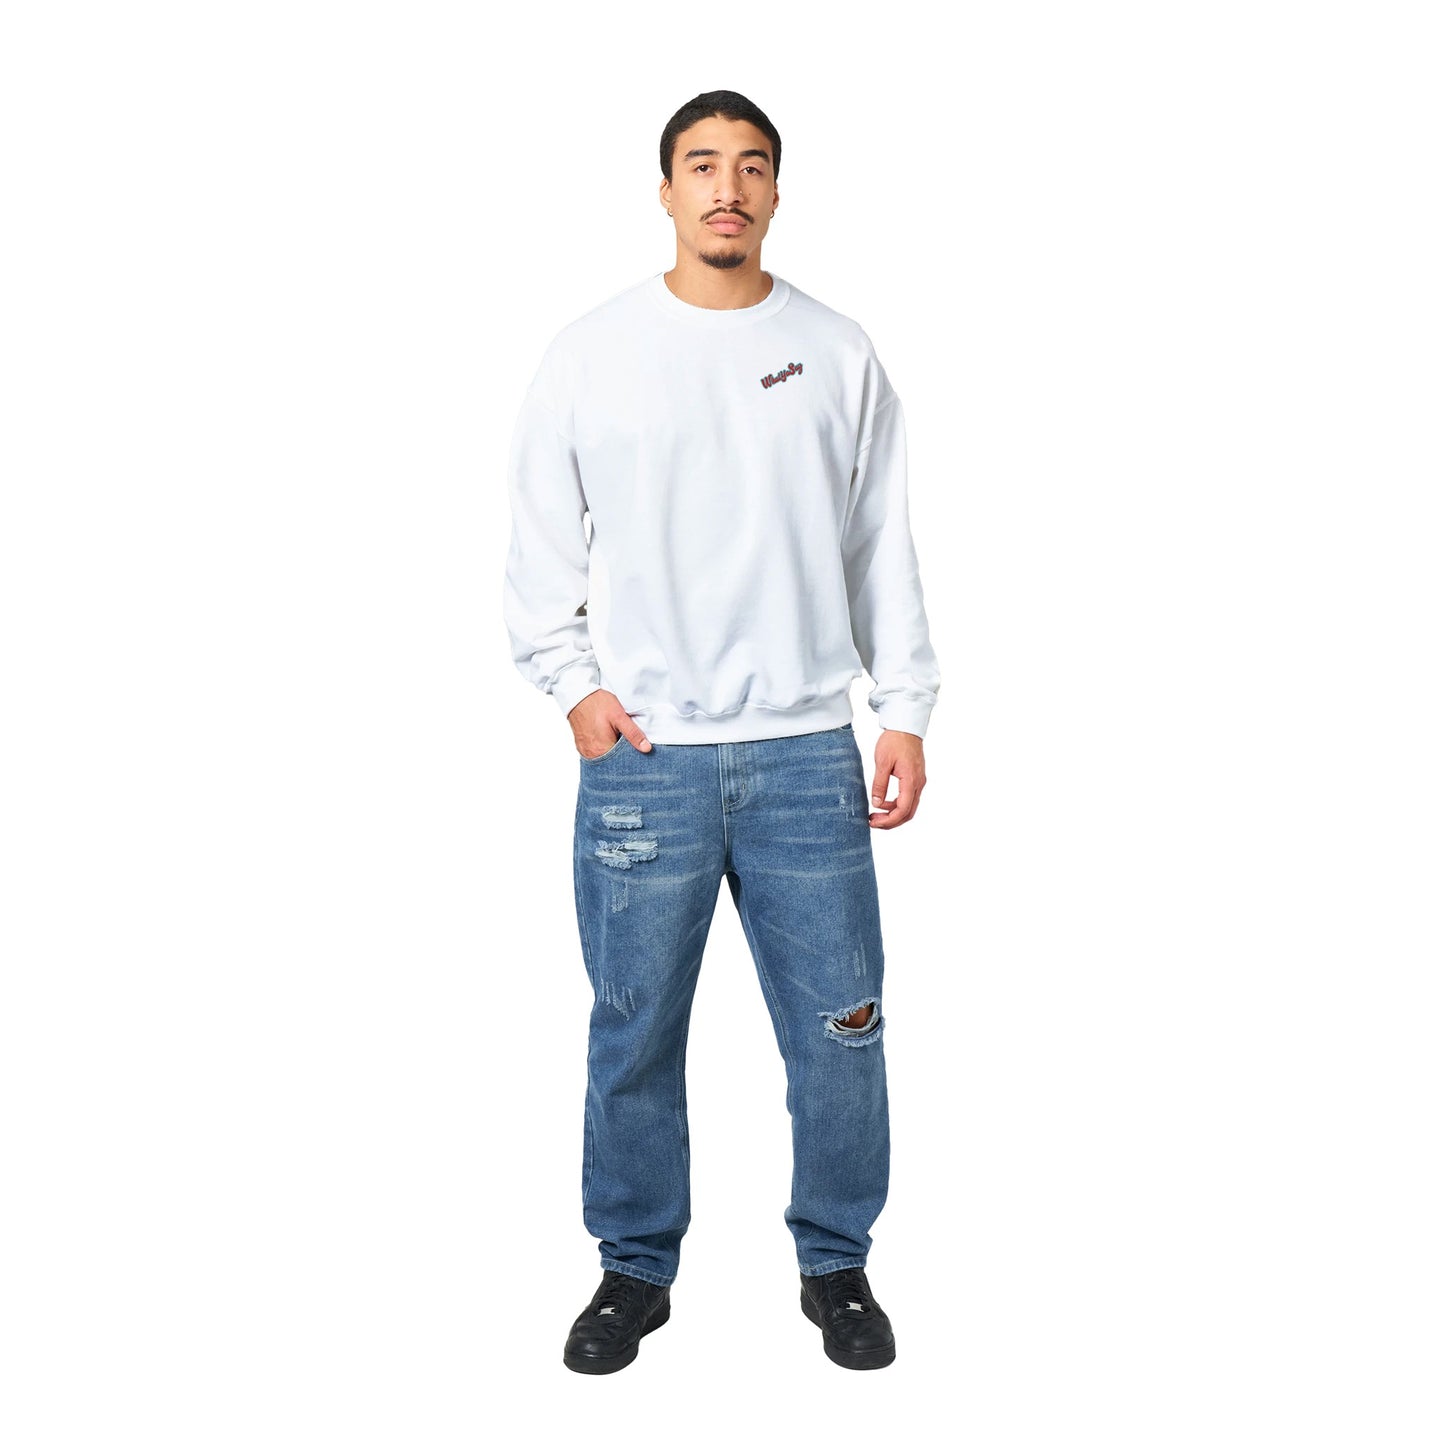 A white Classic Unisex Crewneck sweatshirt with original artwork and motto I Got 99 Problems But a Margarita Ain’t One on back and Whatya Say logo on front from WhatYa Say Apparel a rear view of short haired male model standing.